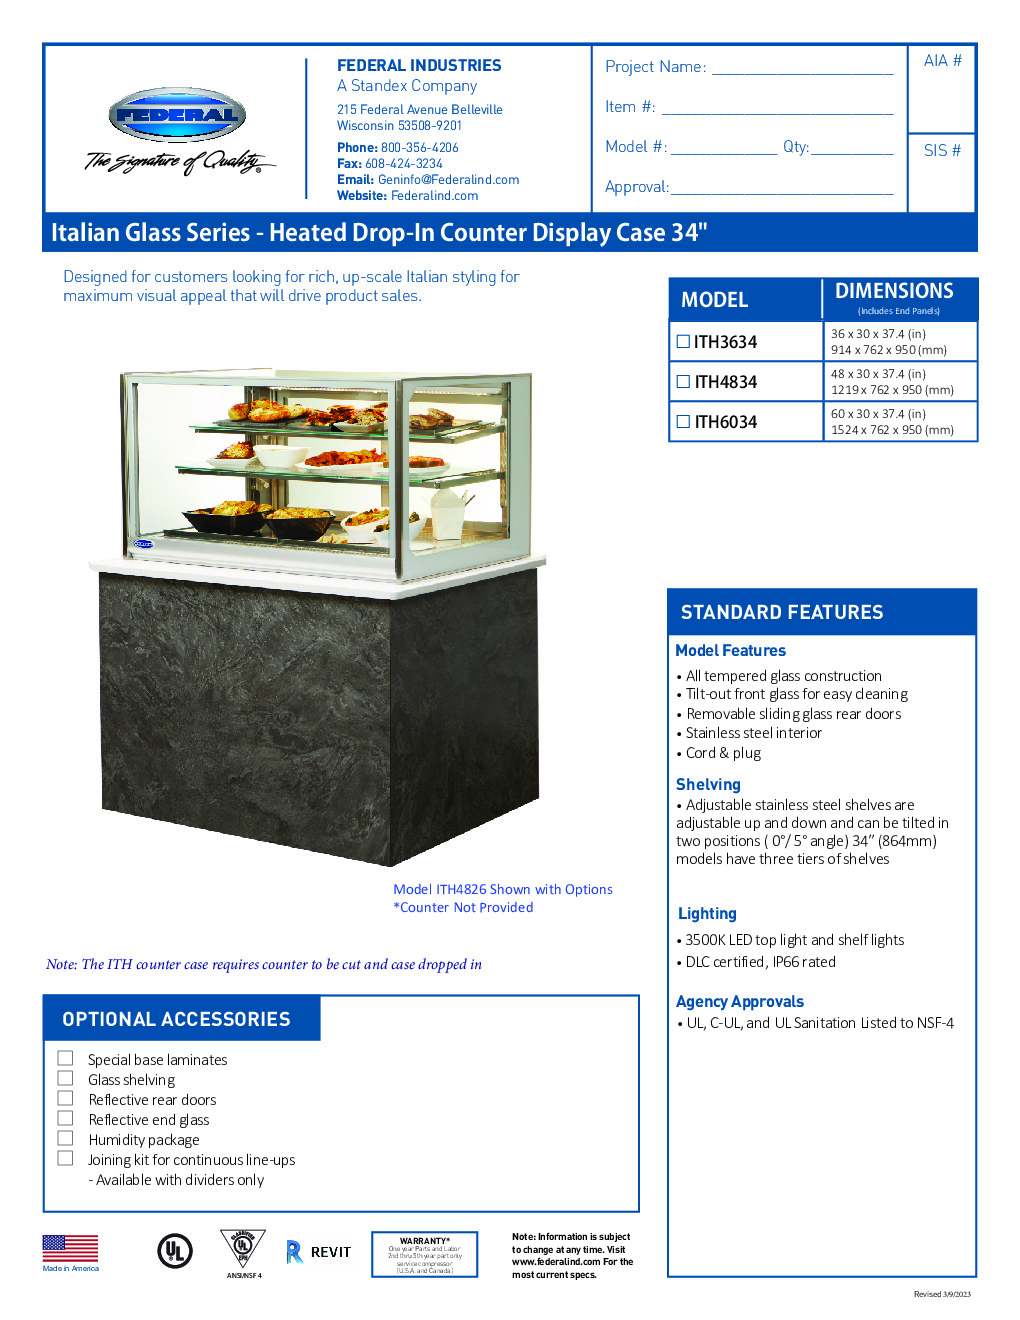 Federal Industries ITH3634 Drop-In Heated Display Case